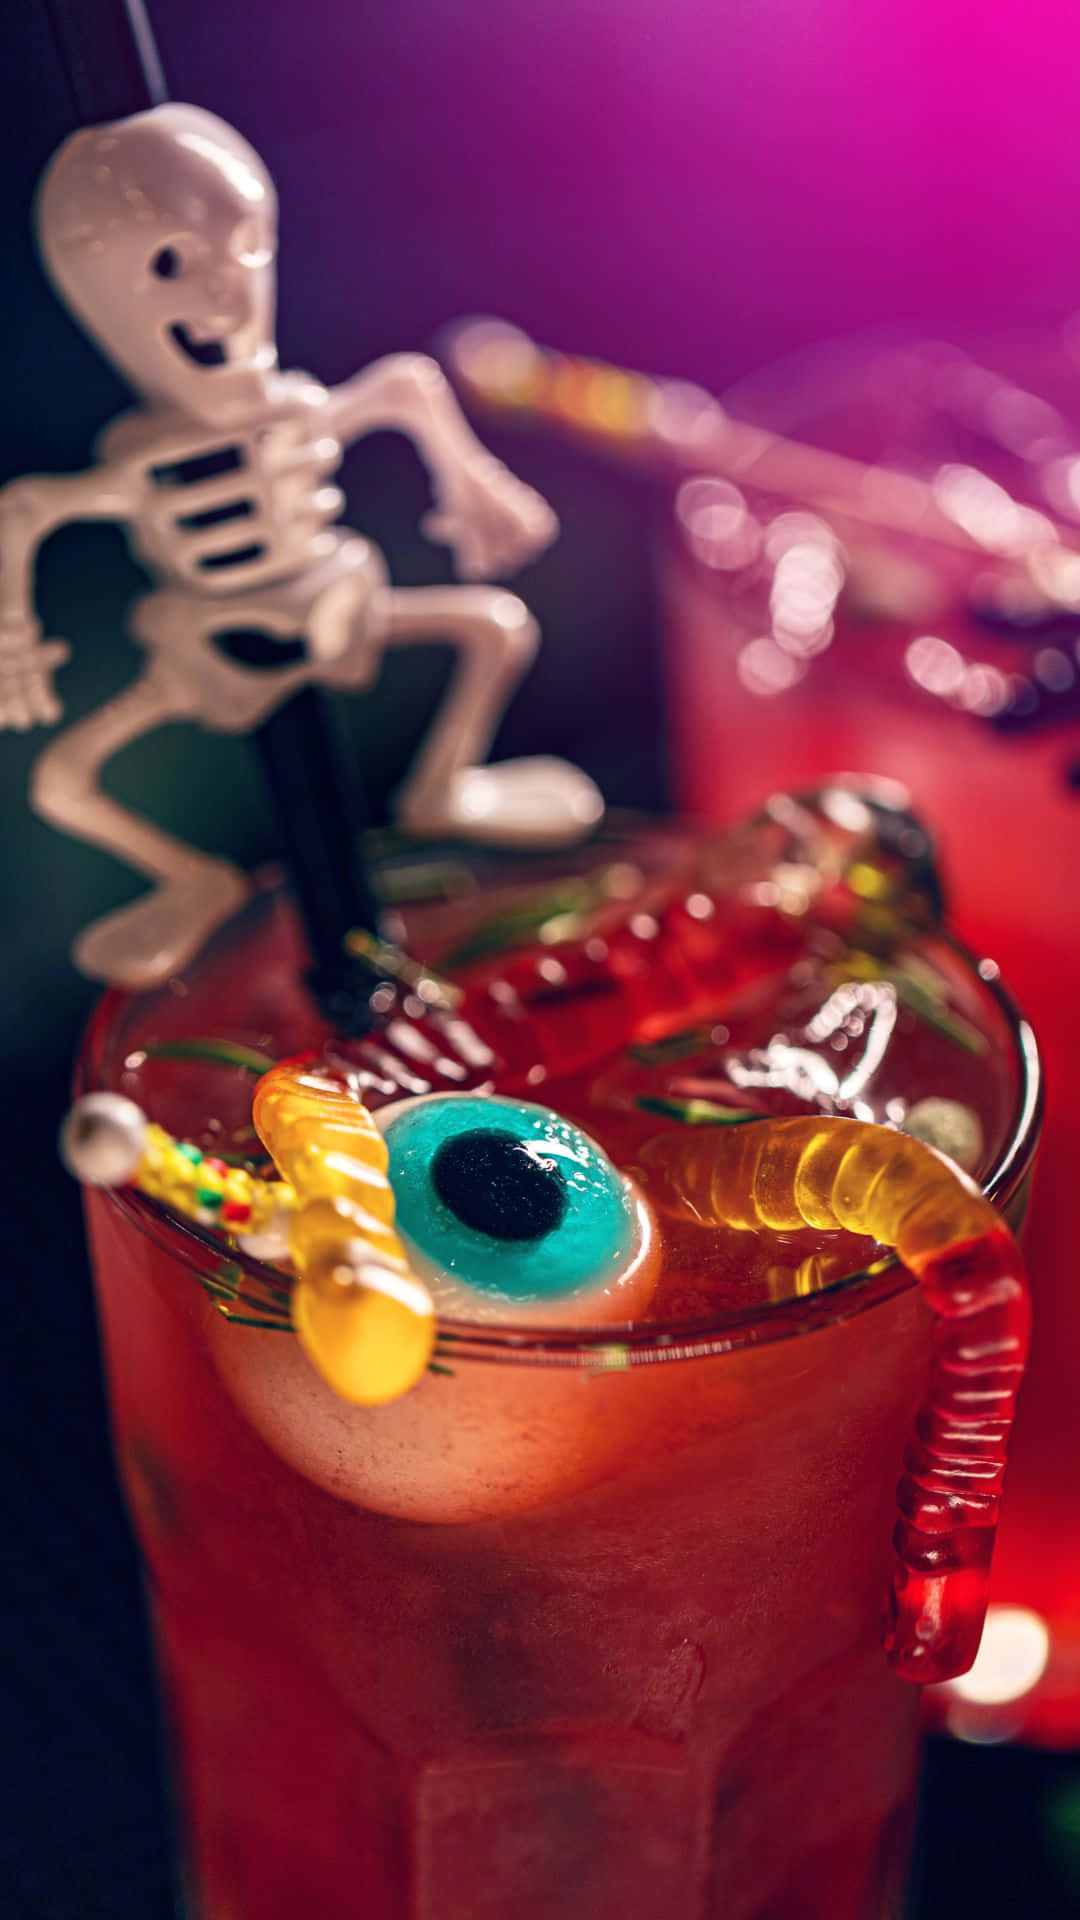 Vamp your nightlife with these spooky cocktails!" Wallpaper